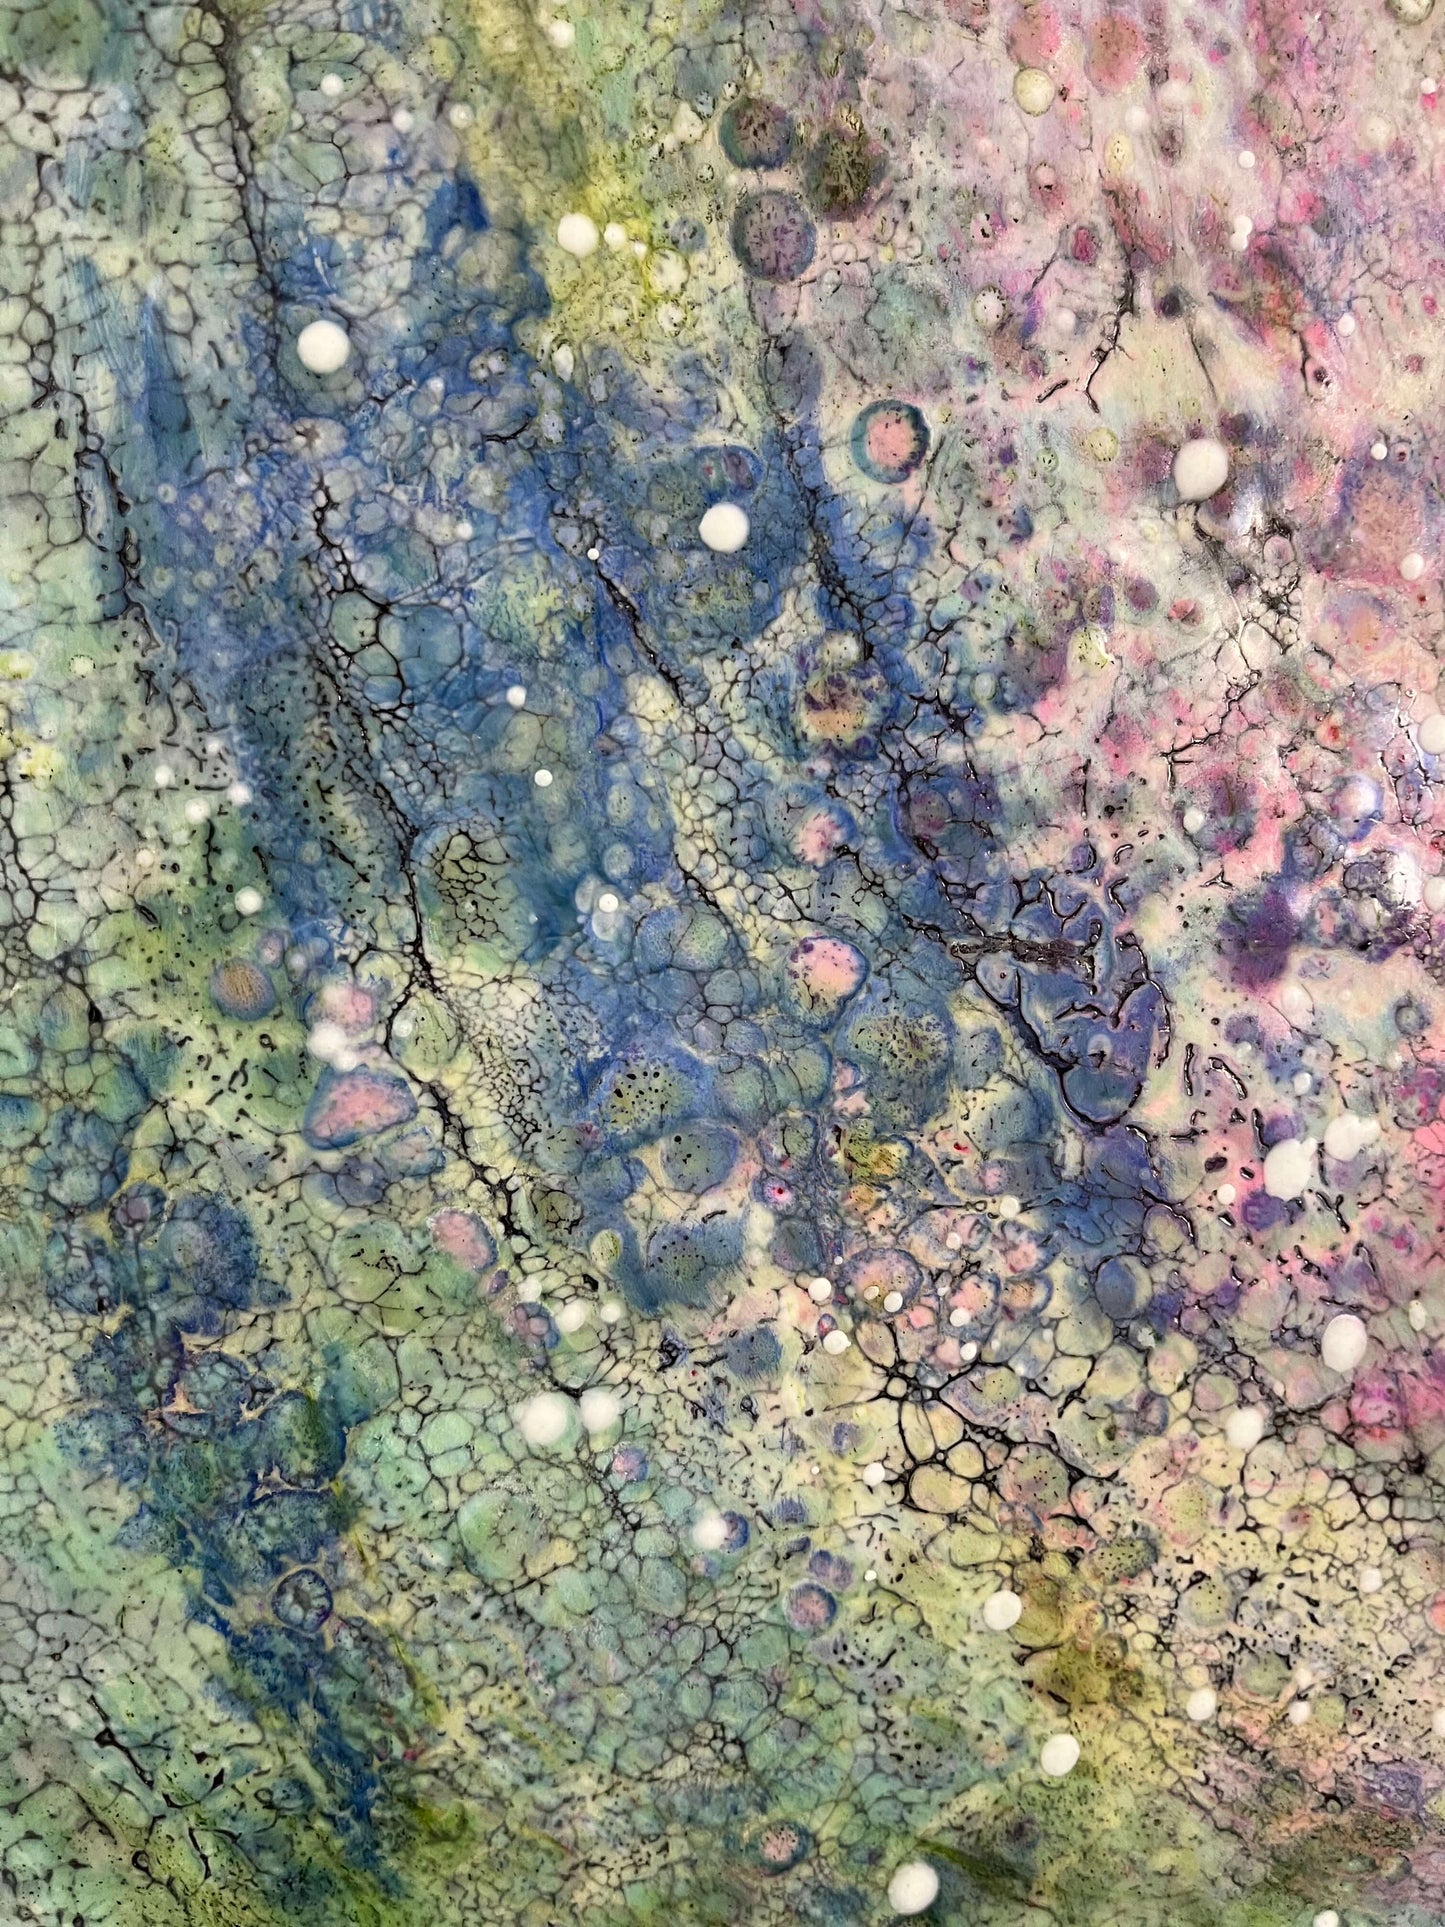 Close up.Abstract Encaustic Painting, 30x30in. Created with beeswax, damar resin, dry pigments and shellac on cradled wood panel. This piece is vibrant with variations of greens, pinks, blues and intricate lace-like texture. The painting has a hypnotizing and energizing feel to it. Hanging hardware is included